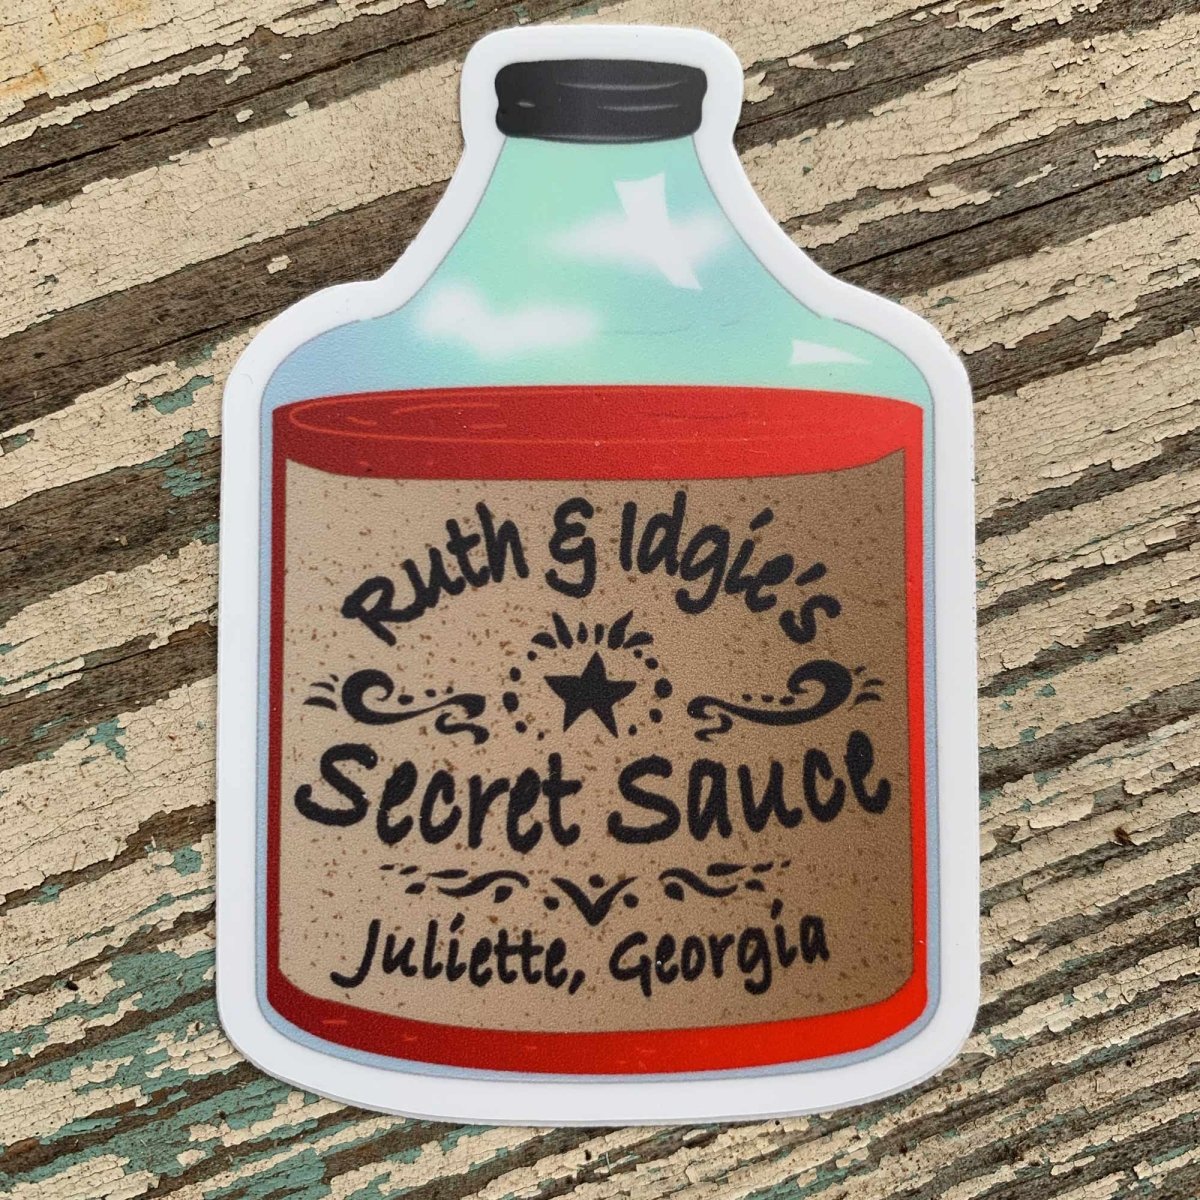 Ruth & Idgie's Secret Sauce - Premium Stickers & Magnets | Fried Green Tomatoes, Whistle Stop Cafe